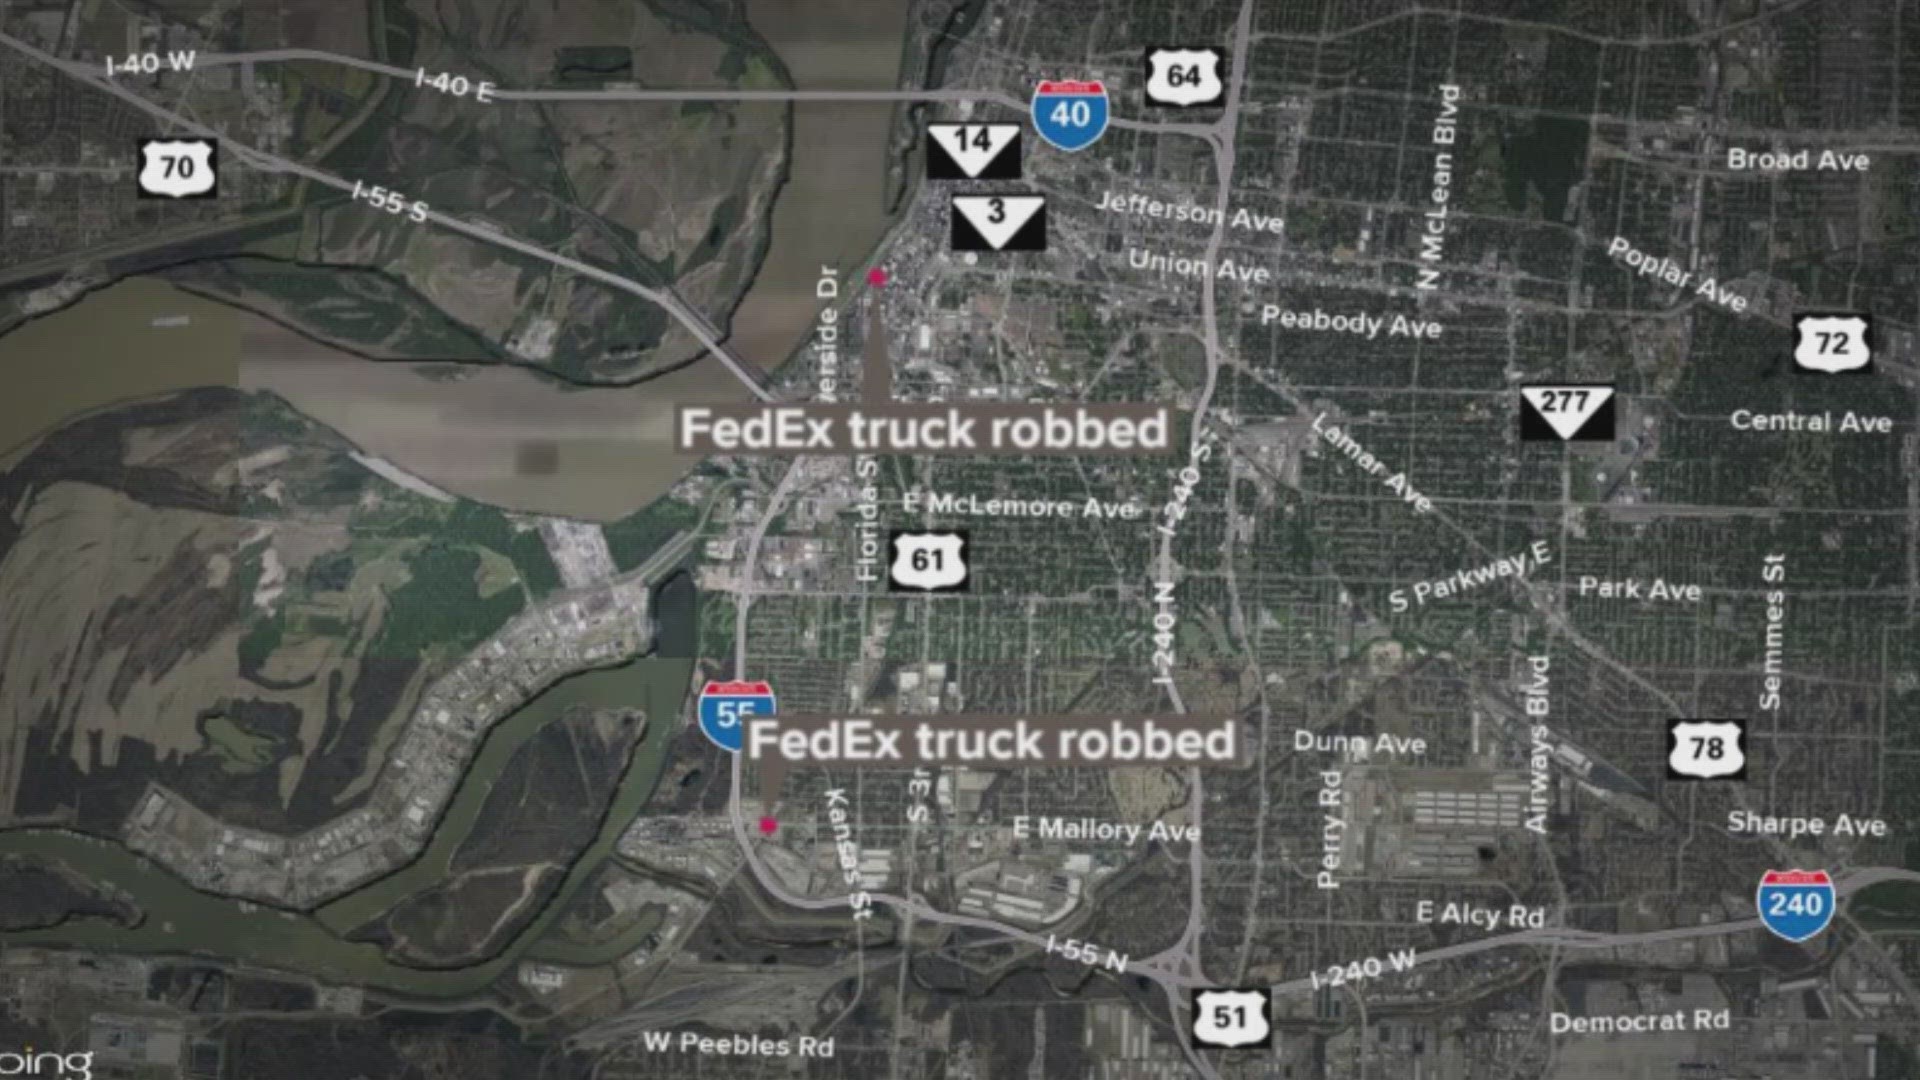 An unknown amount of packages were stolen from FedEx trucks in Memphis over the past month, and the shipping giant is teaming up with CrimeStoppers to find culprits.